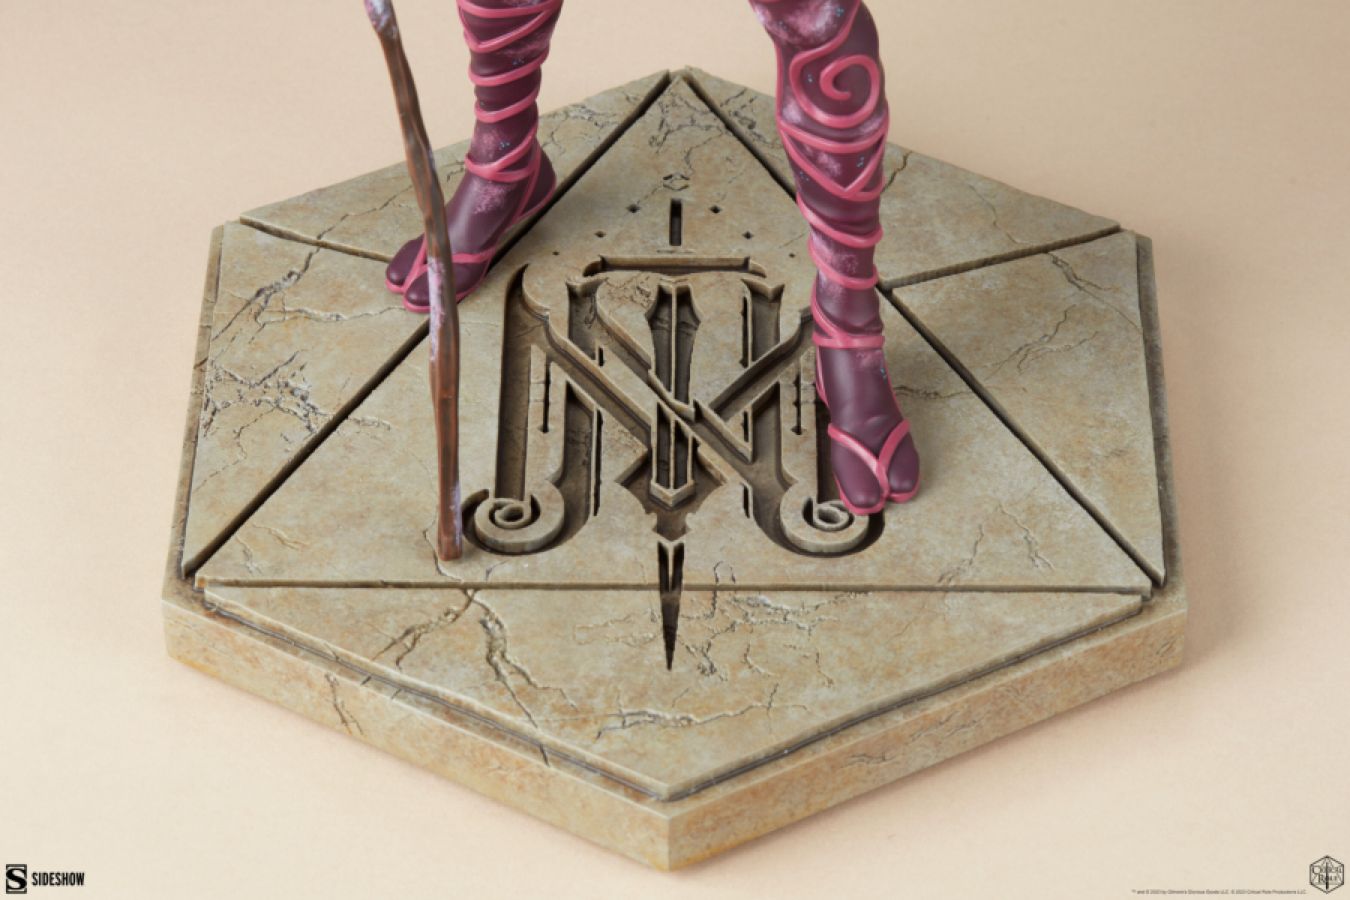 Critical Role - Caduceus Clay (Mighty Nein) Statue